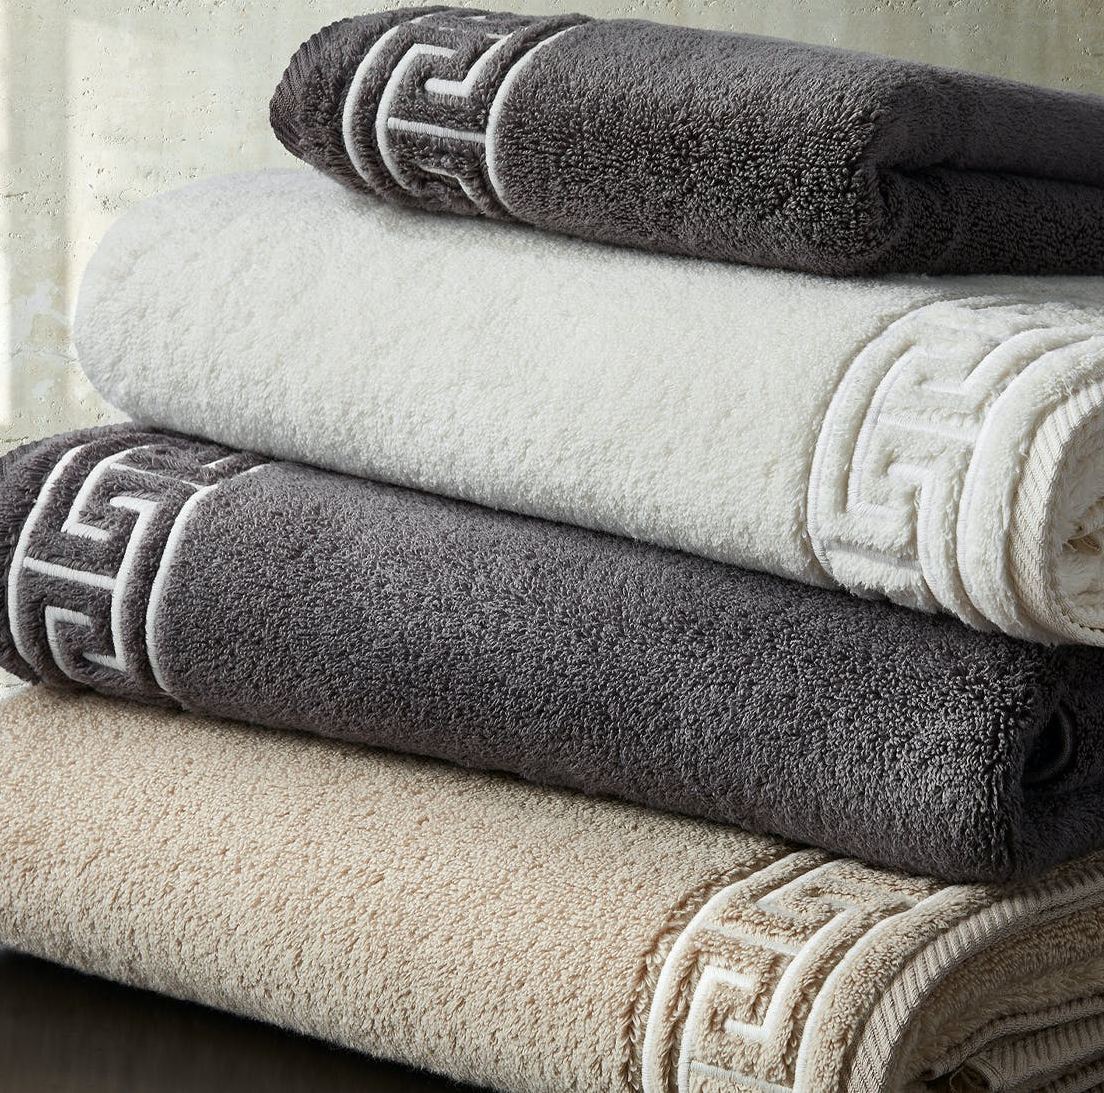 Matouk Marcus Collection Luxury Hand Towel, Pool, Bath Towels & Bath Rugs Hand Towels